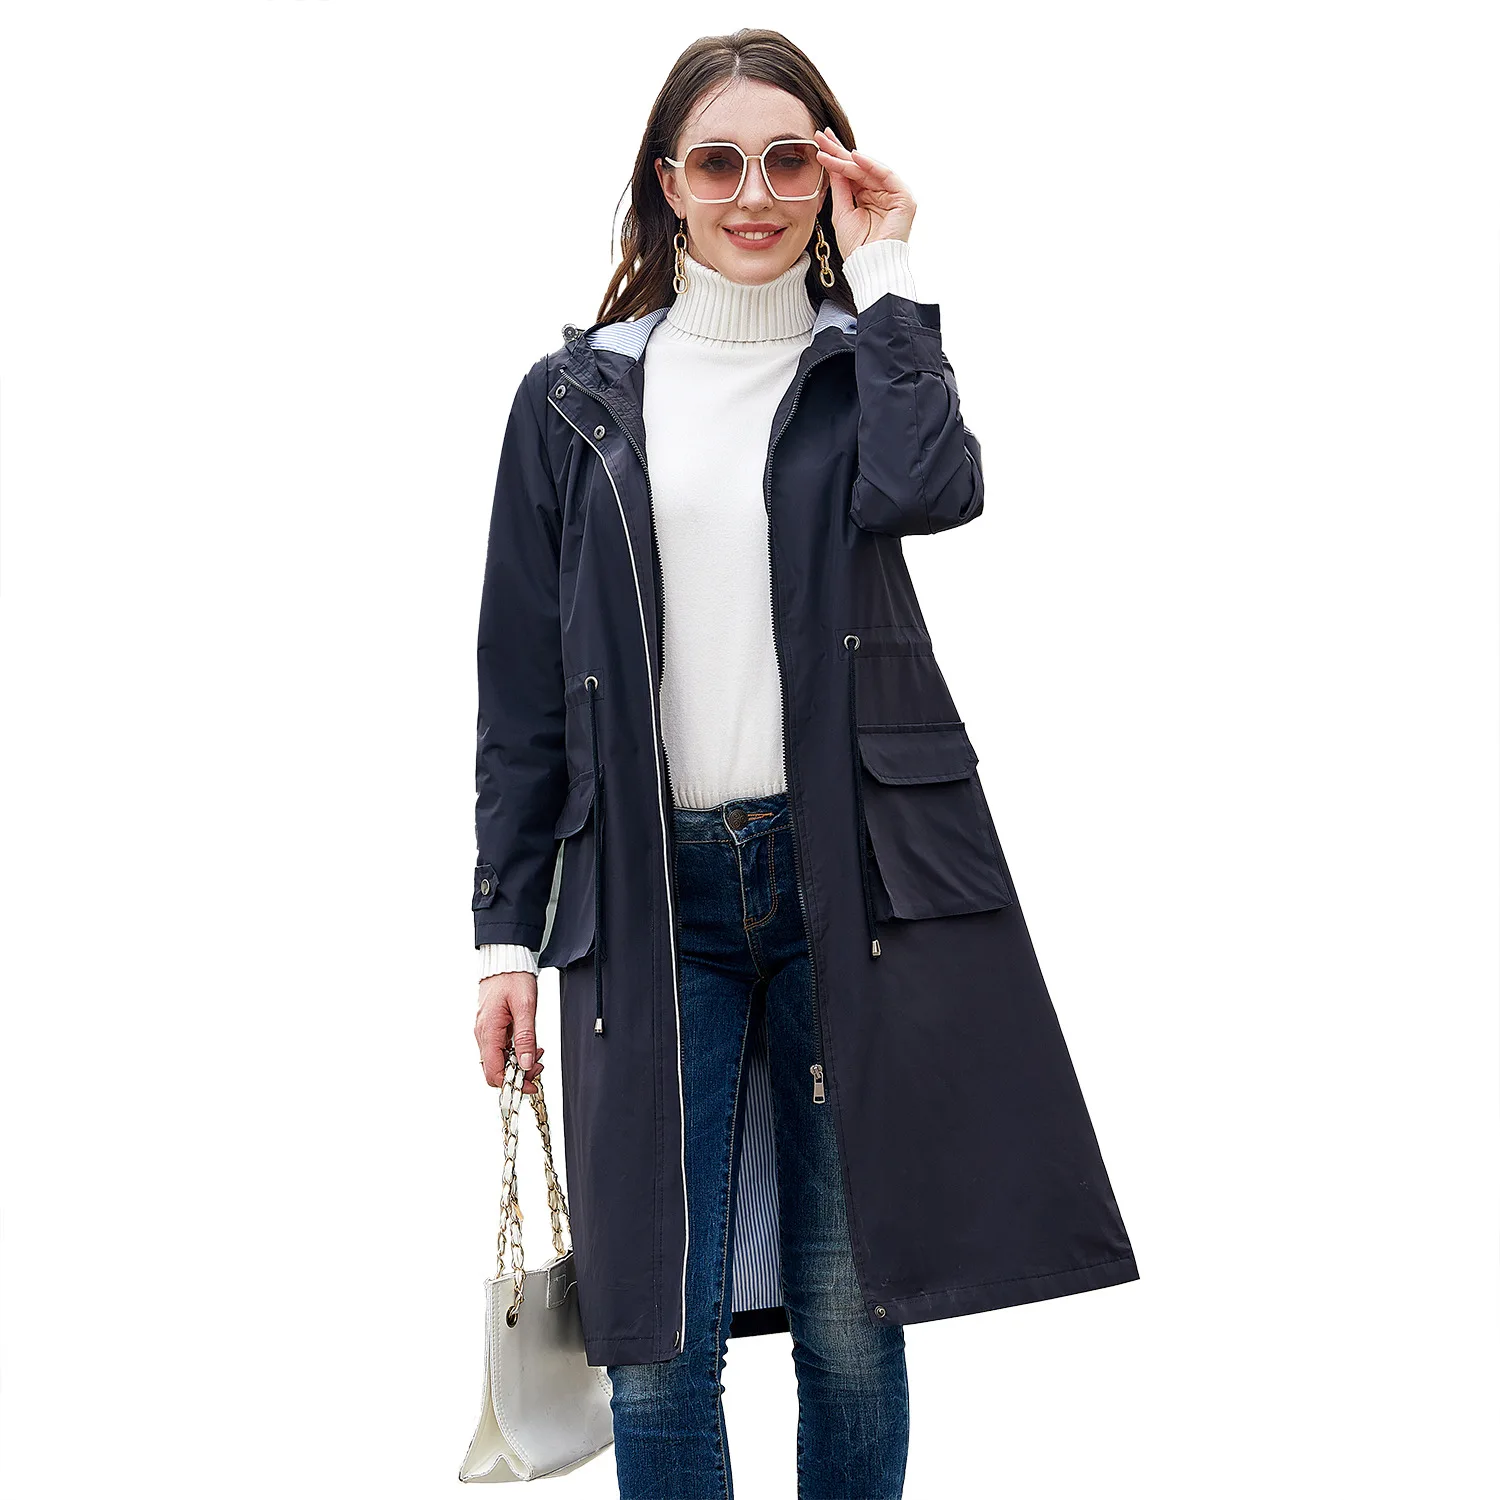 Ueteey Spring and Autumn High -quality Long Trench Coat Female Extended Jacket Loose Zipper Long -sleeved Hooded Trench Coat